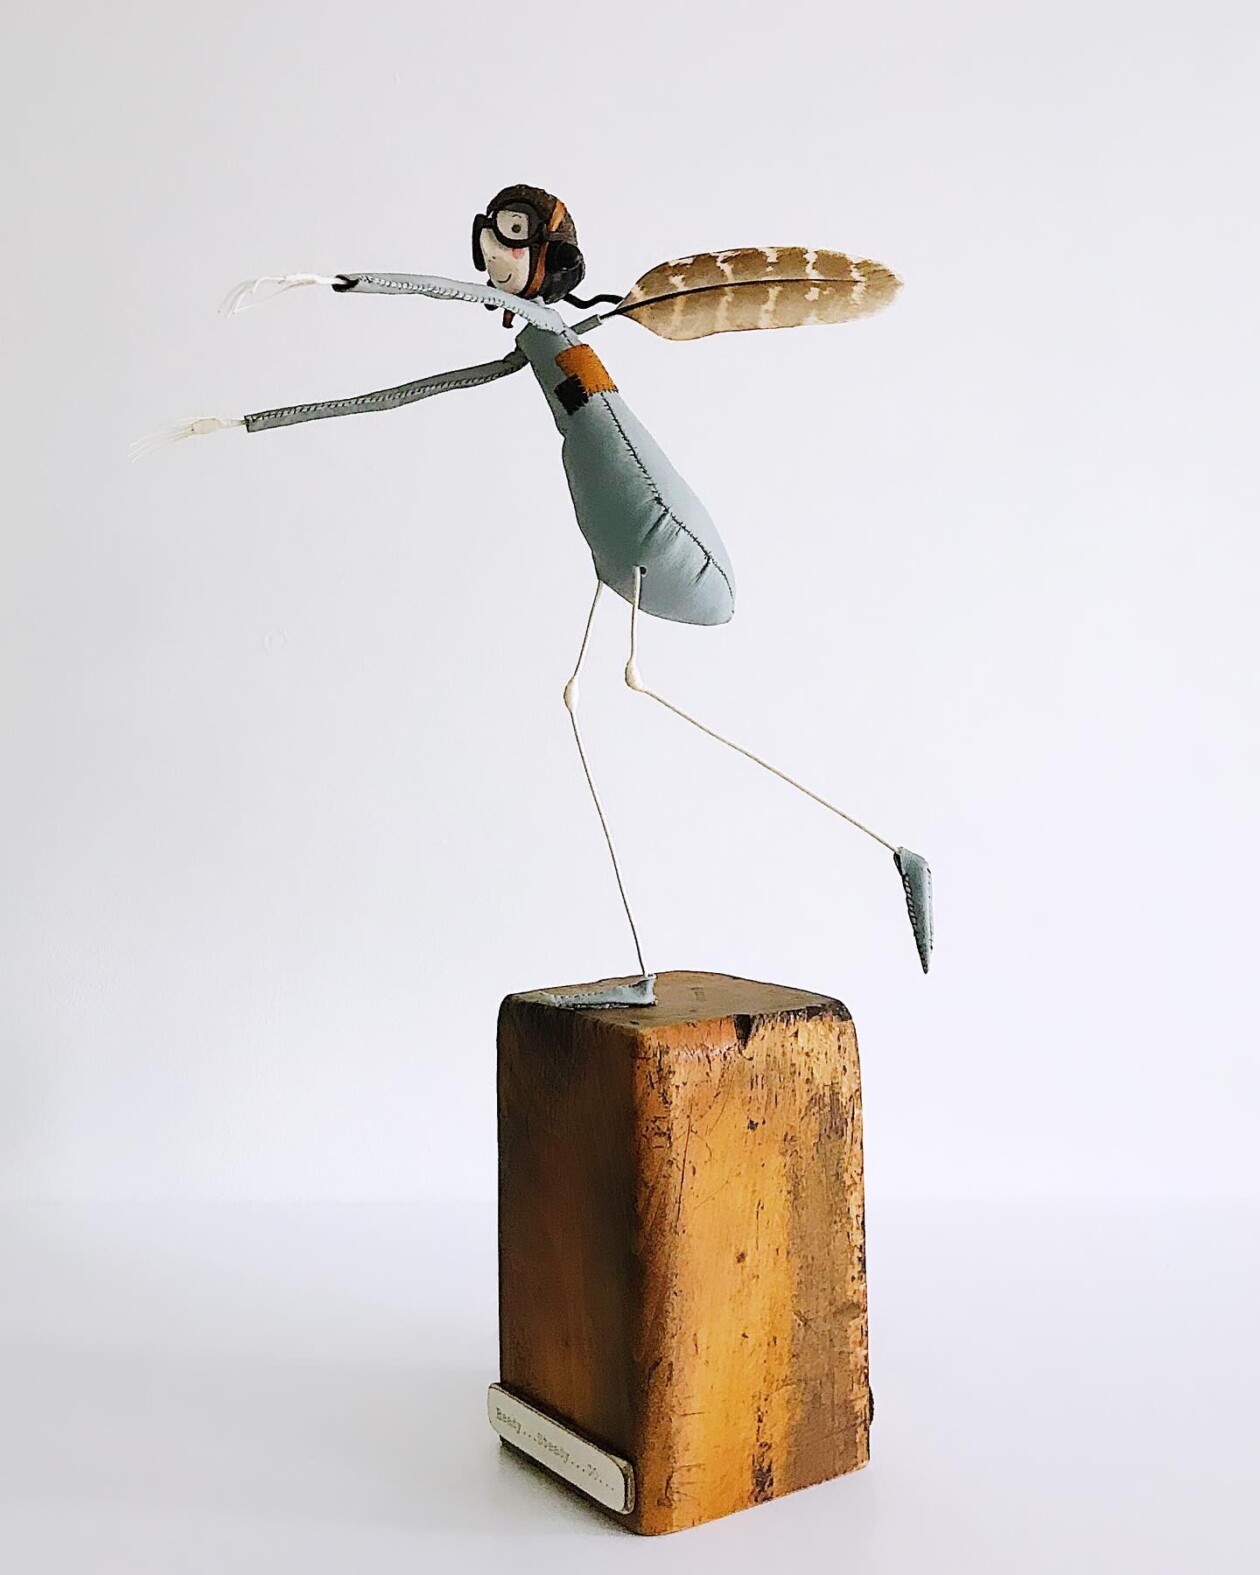 The Quirky And Amusing Fairy Lady Sculptures Of Samantha Bryan (7)